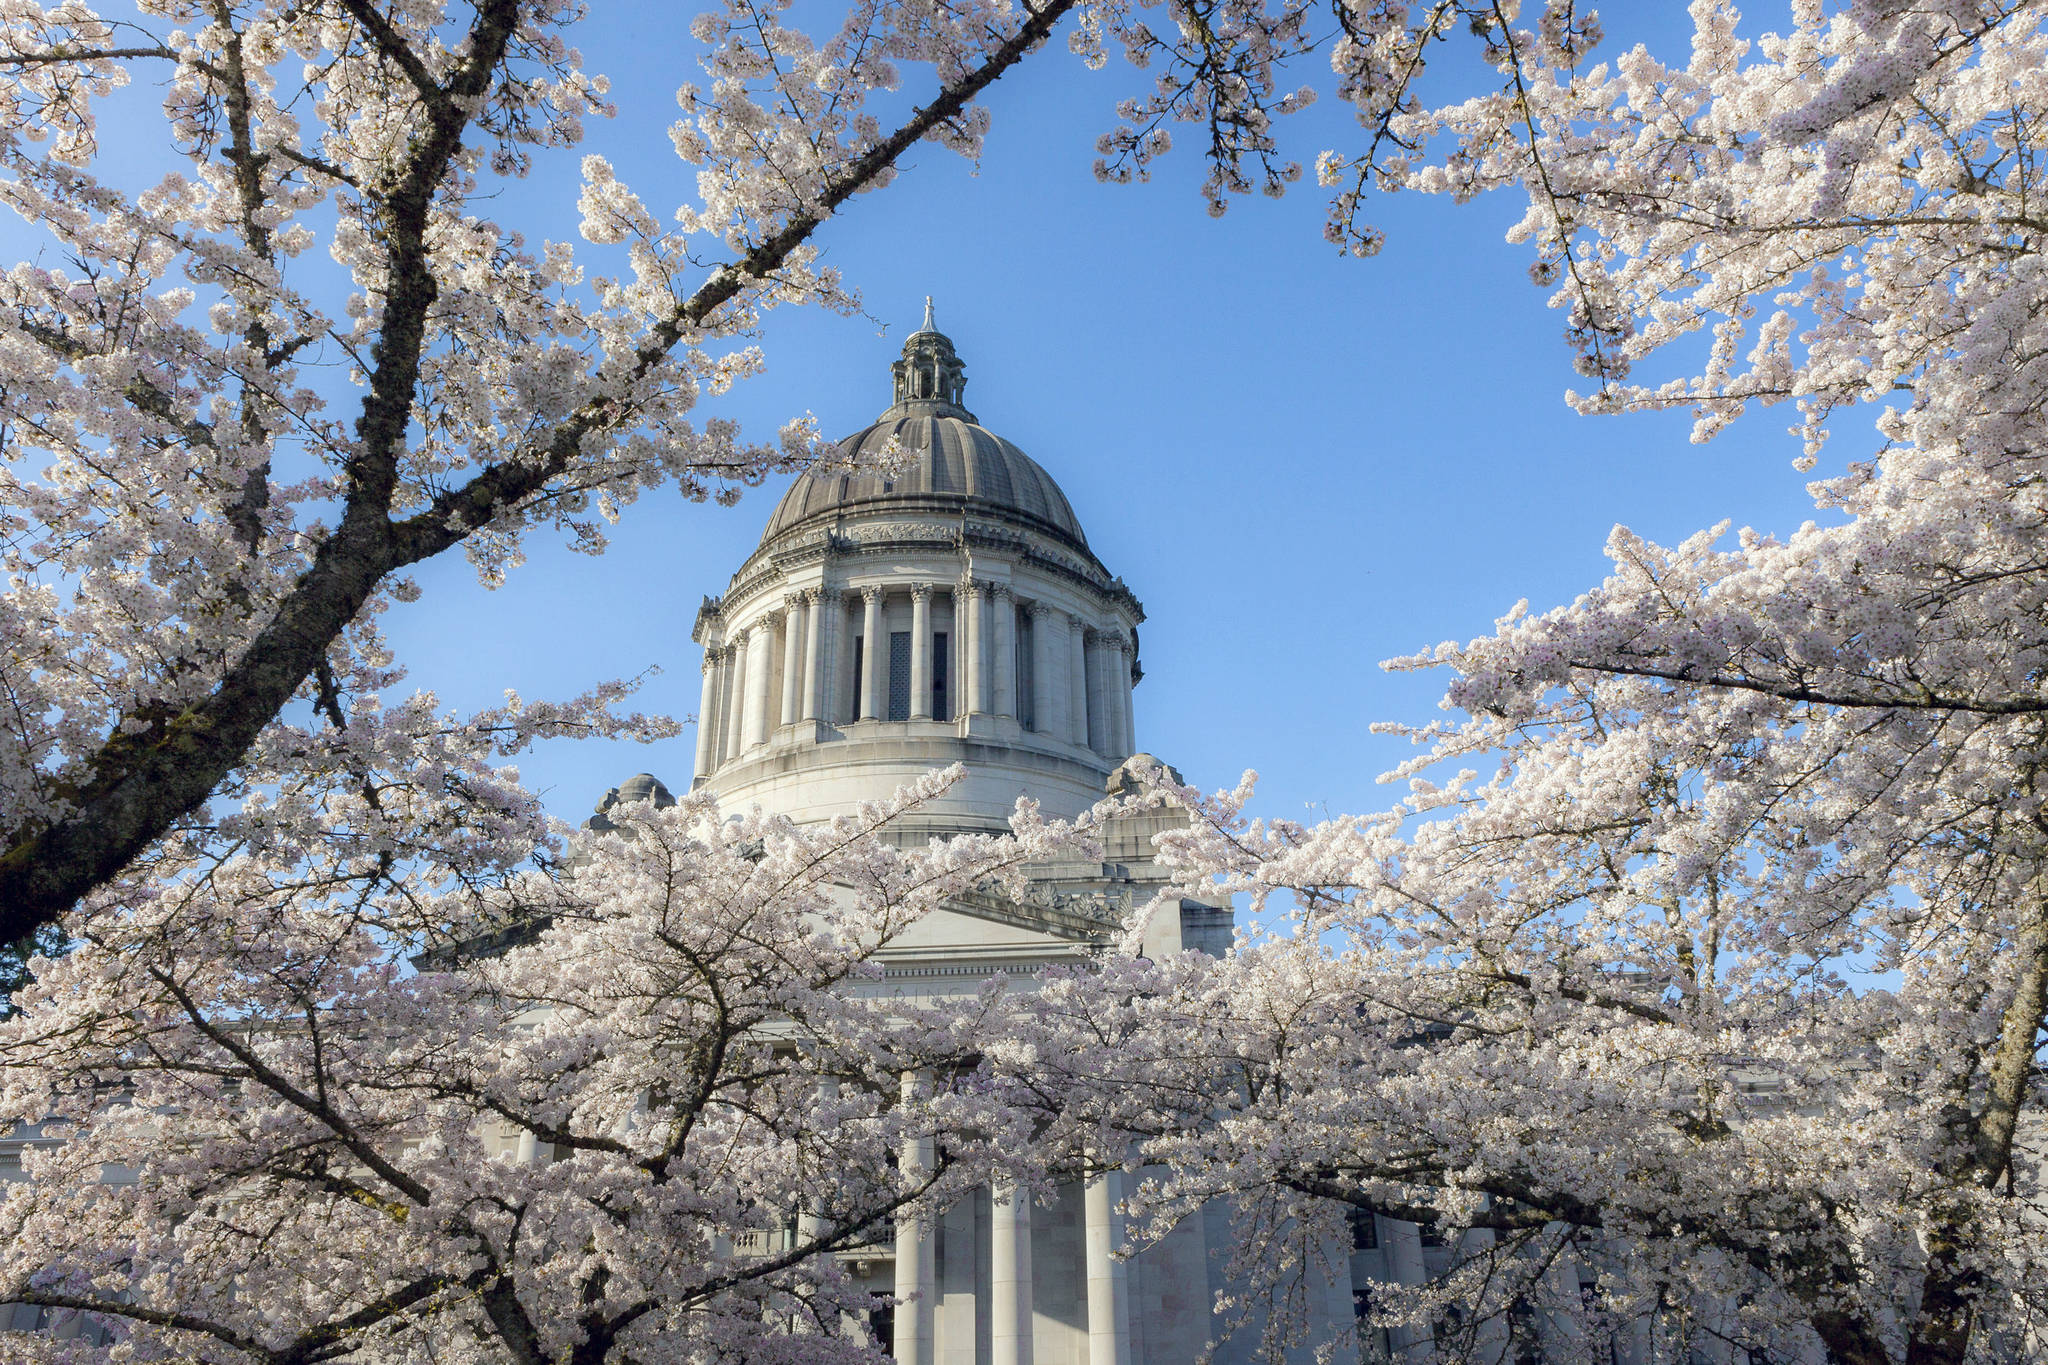 (Linda J. Smith) Cherry trees fully in bloom at the state capital in Olympia.                                (Linda J. Smith) Cherry trees fully in bloom at the state capital in Olympia.